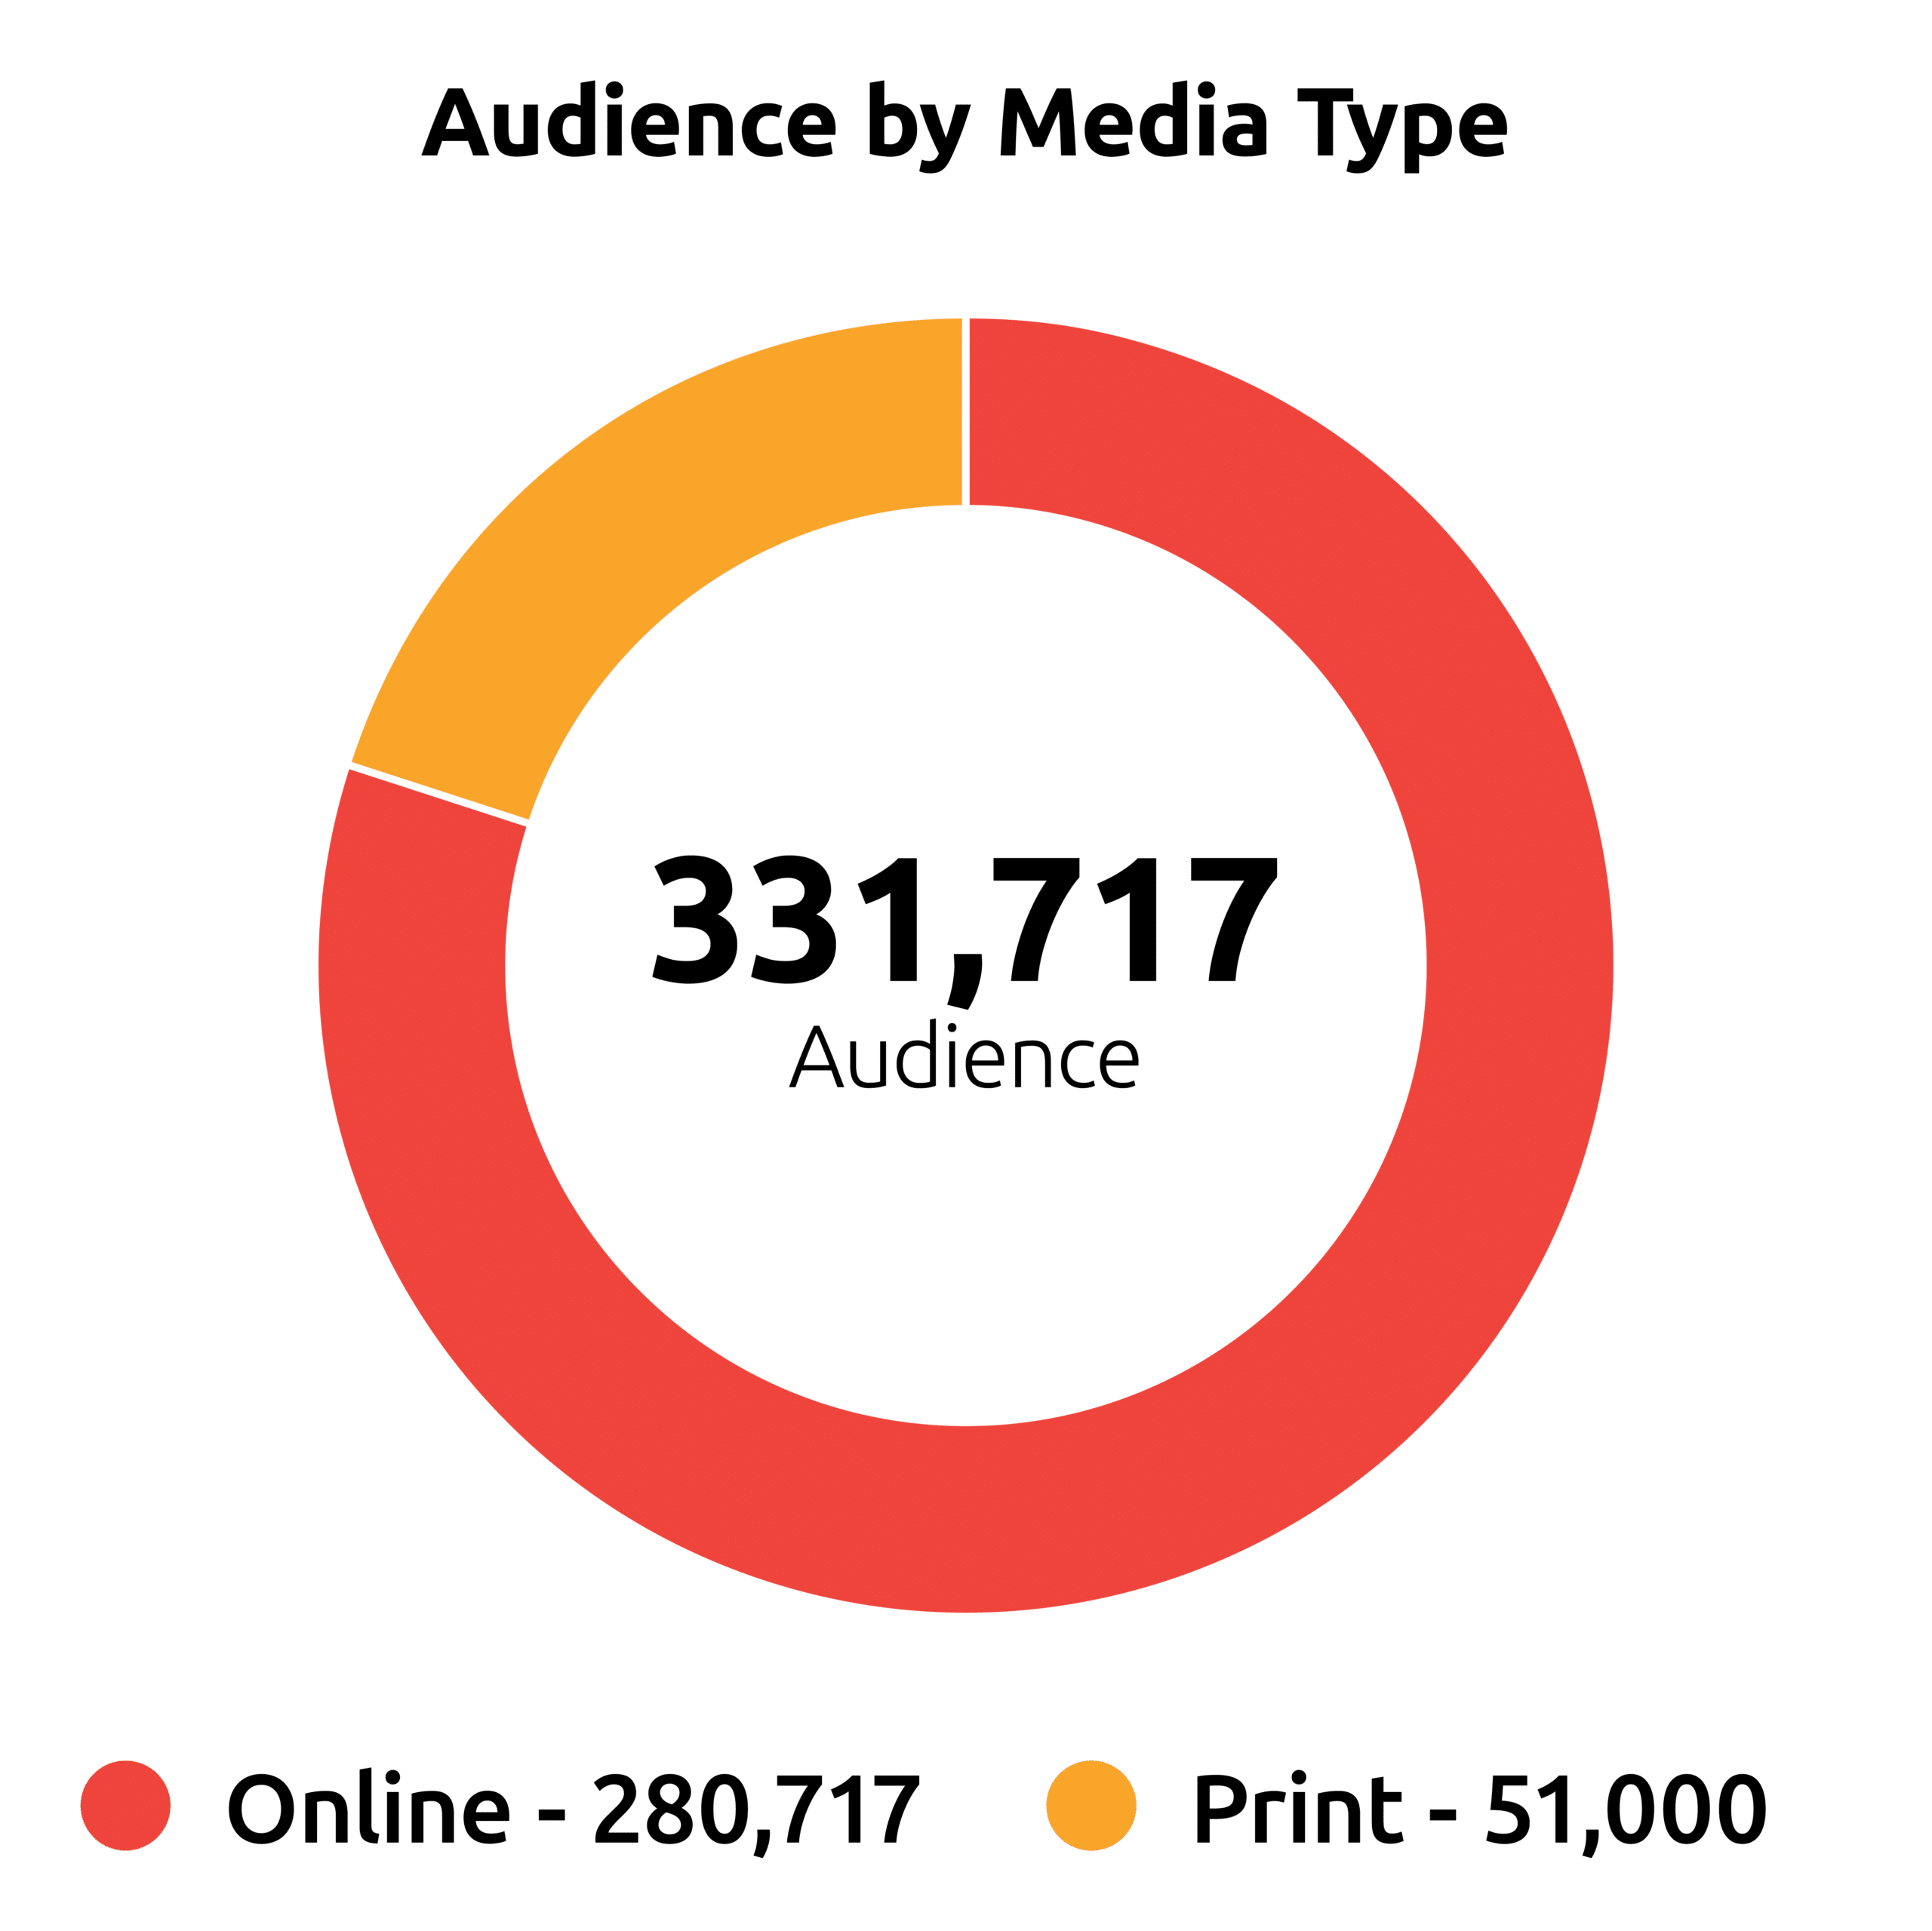 Pie chart style graph showing Audience by Media Type Total - 331,717 Online - 280,717 Print - 51,000